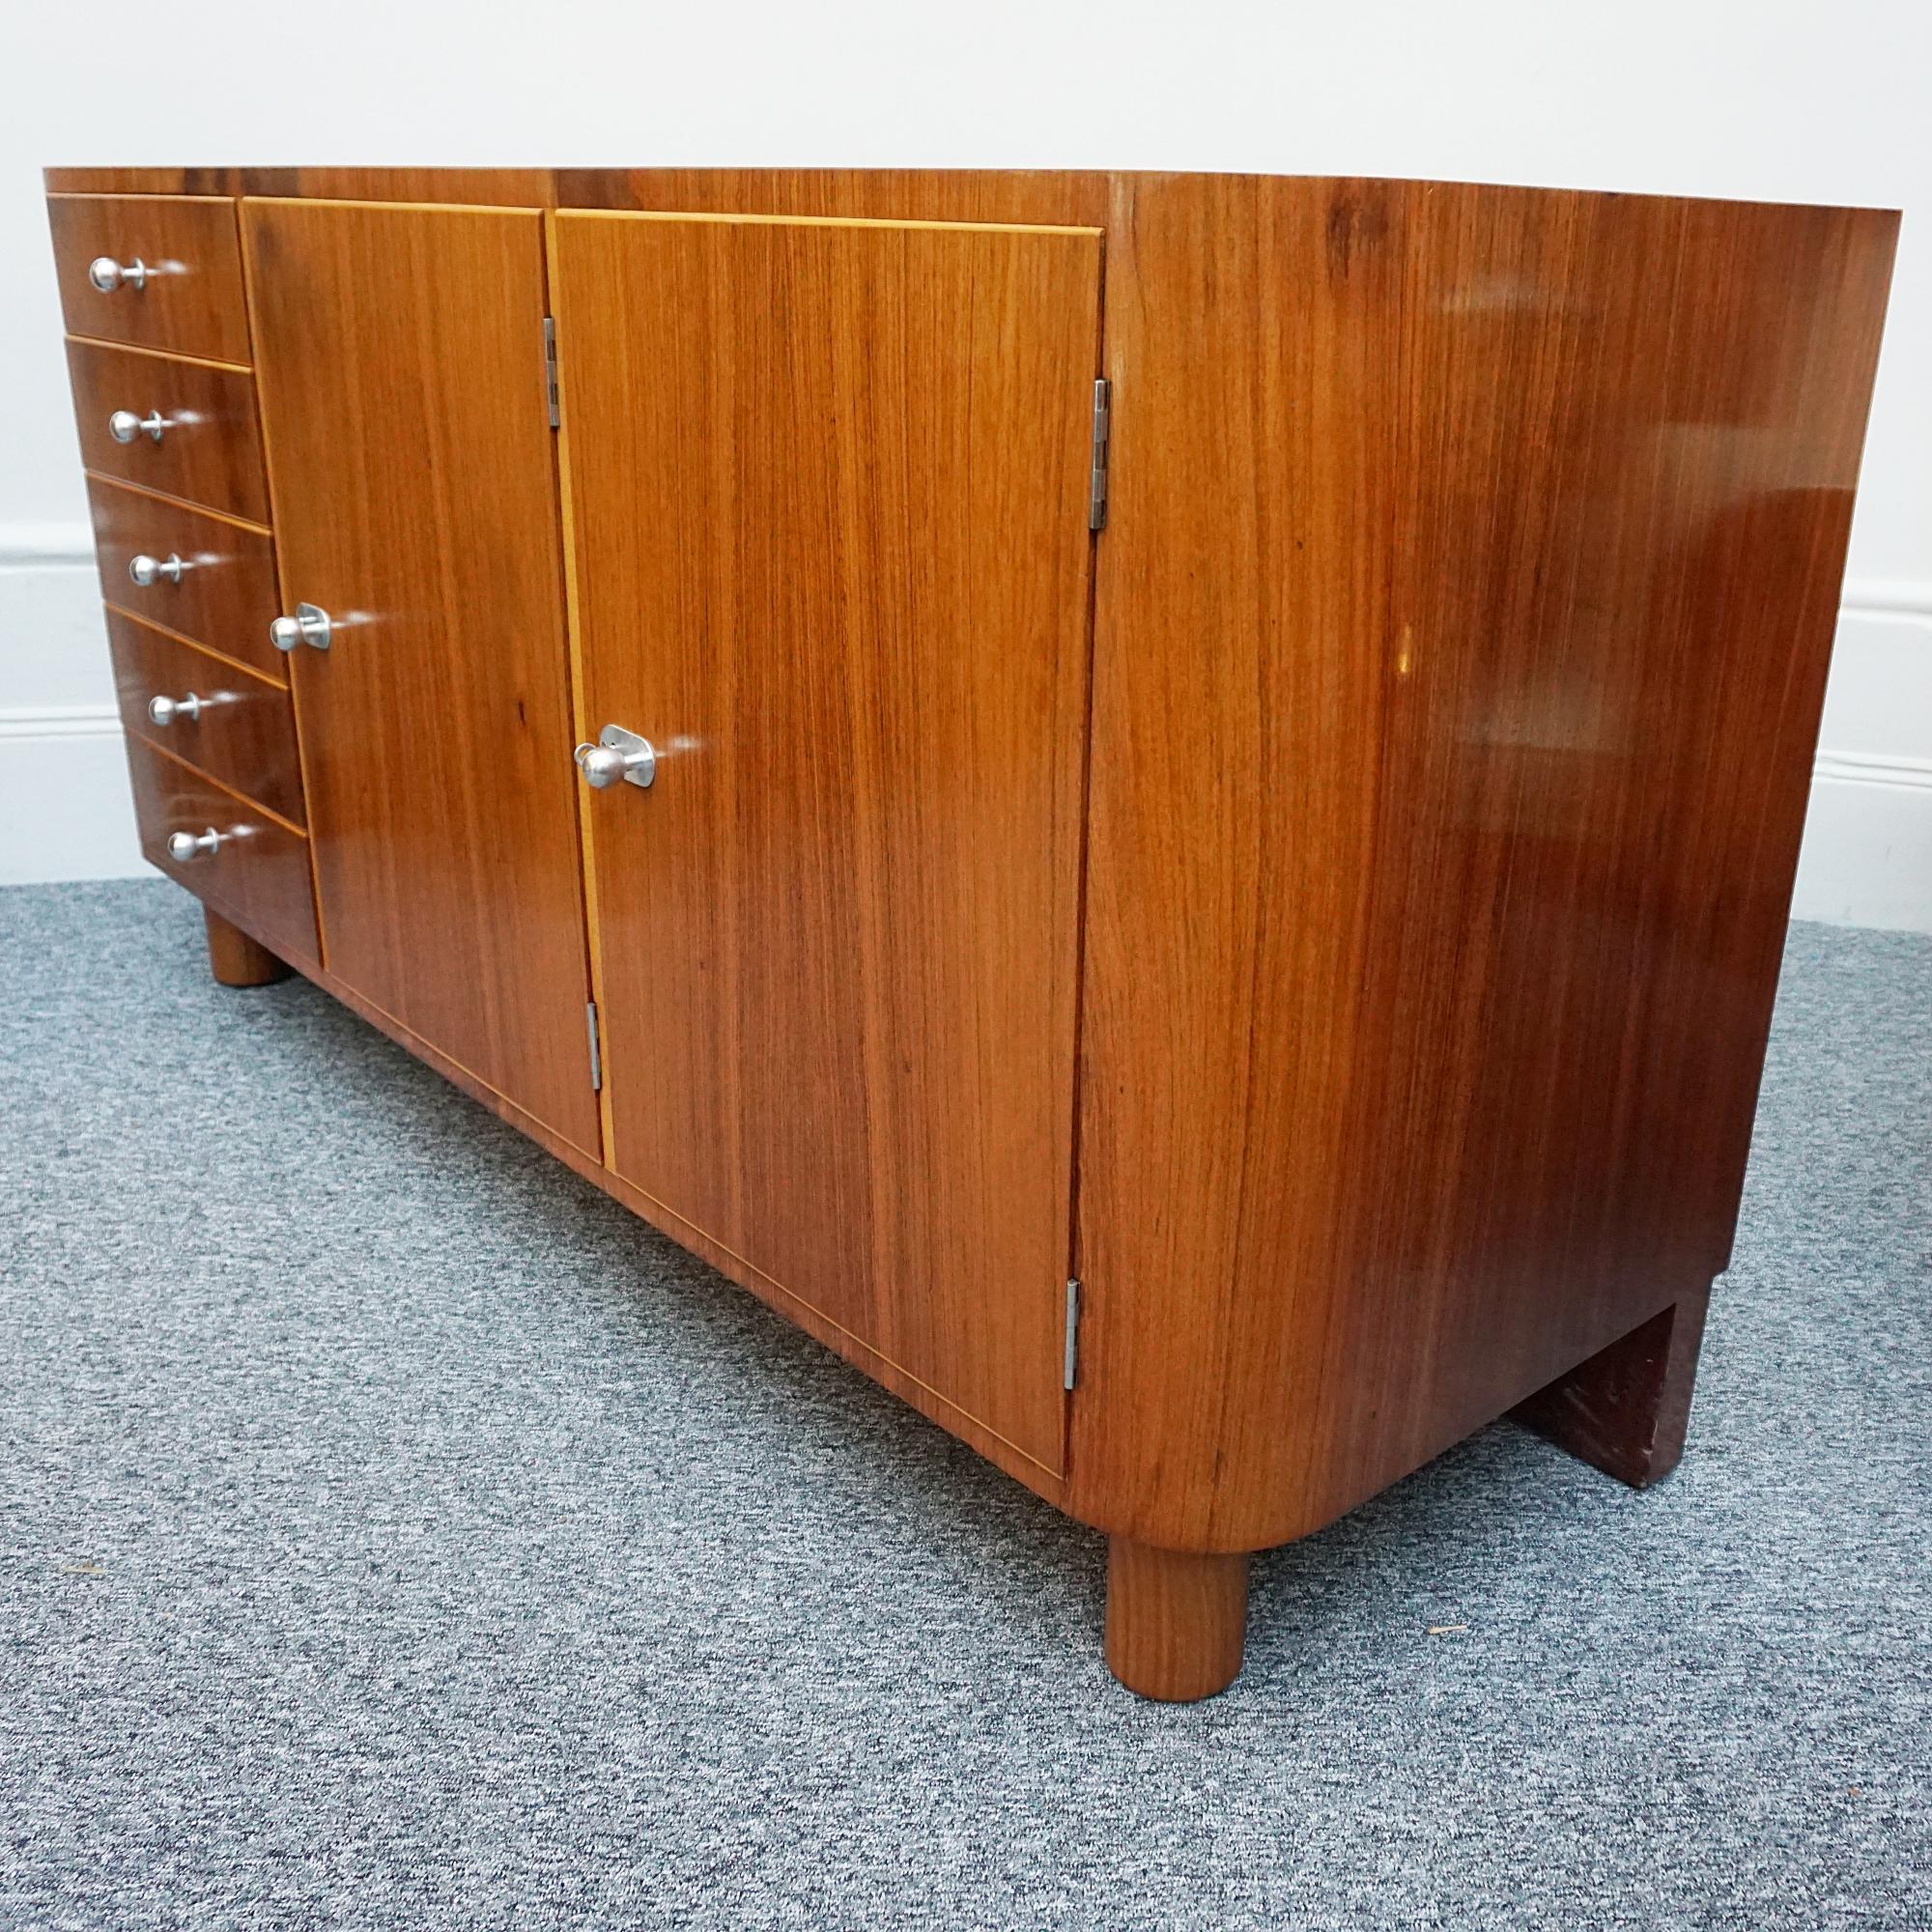 An Art Deco 'Woburn' Sideboard by Gordon Russell. Figured Walnut veneered with elm banding on Solid Oak. Designed in 1933 by Dick Russell. Original chrome handles and keys with five drawers and two shelved cabinet sections. 

Dimensions: H 84.5cm W